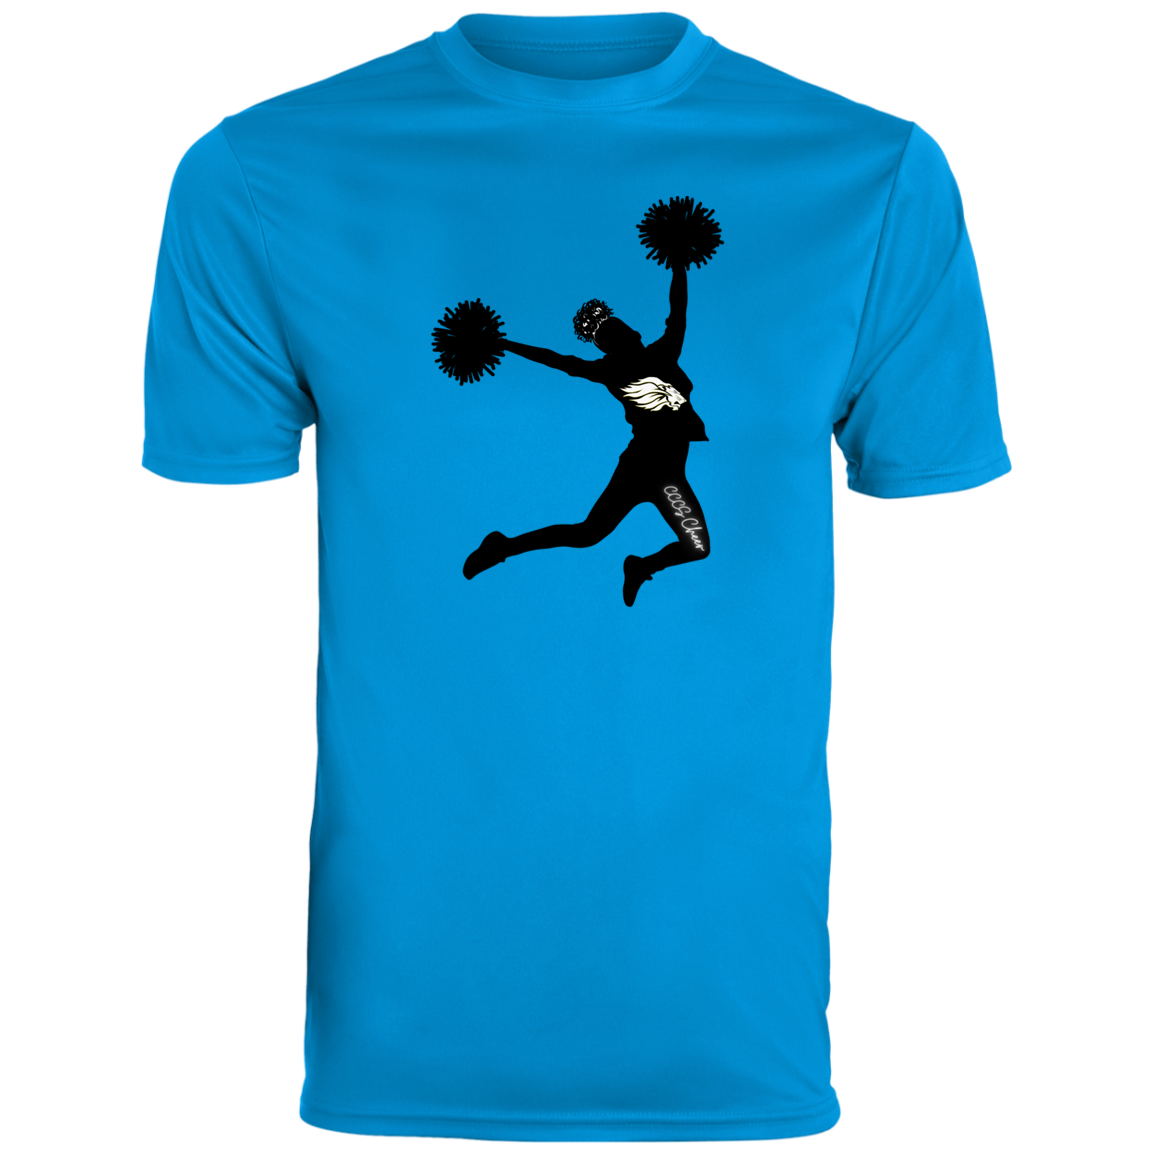 CCCS Cheer Silhouette Youth Moisture-Wicking Tee